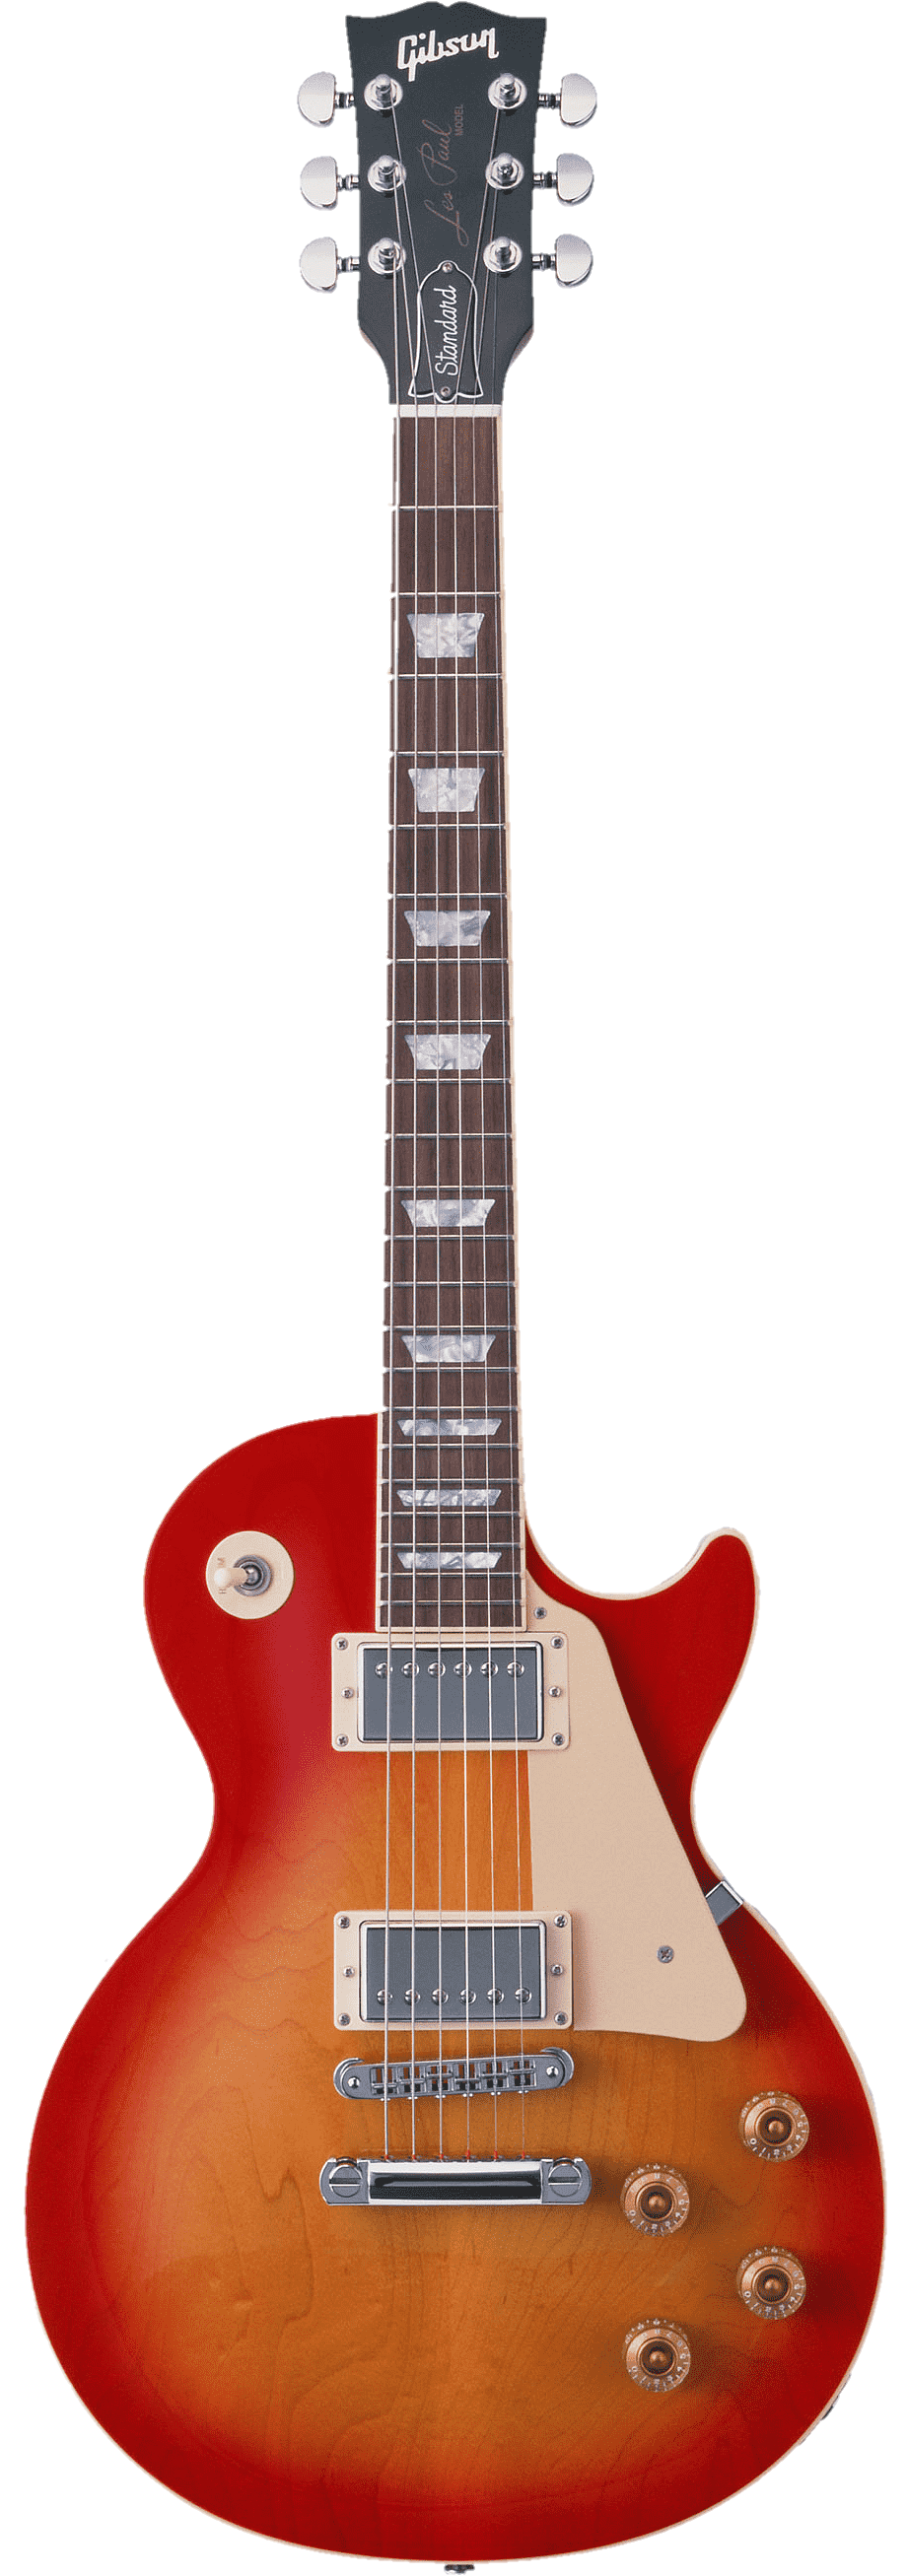 guitar-png-image-from-pngfre-5